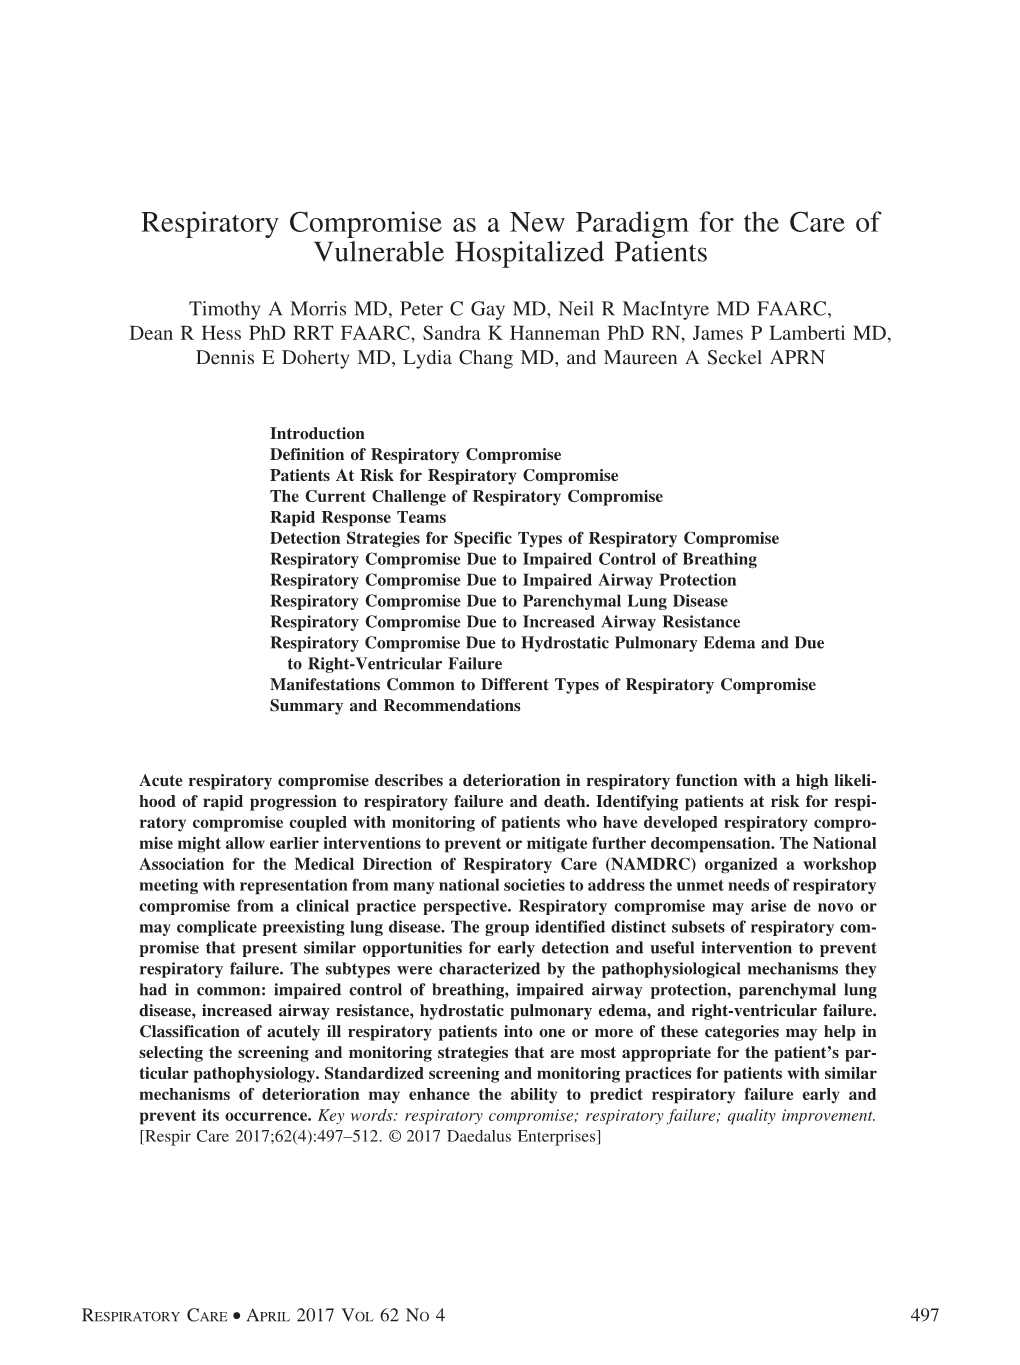 Respiratory Compromise As a New Paradigm for the Care of Vulnerable Hospitalized Patients